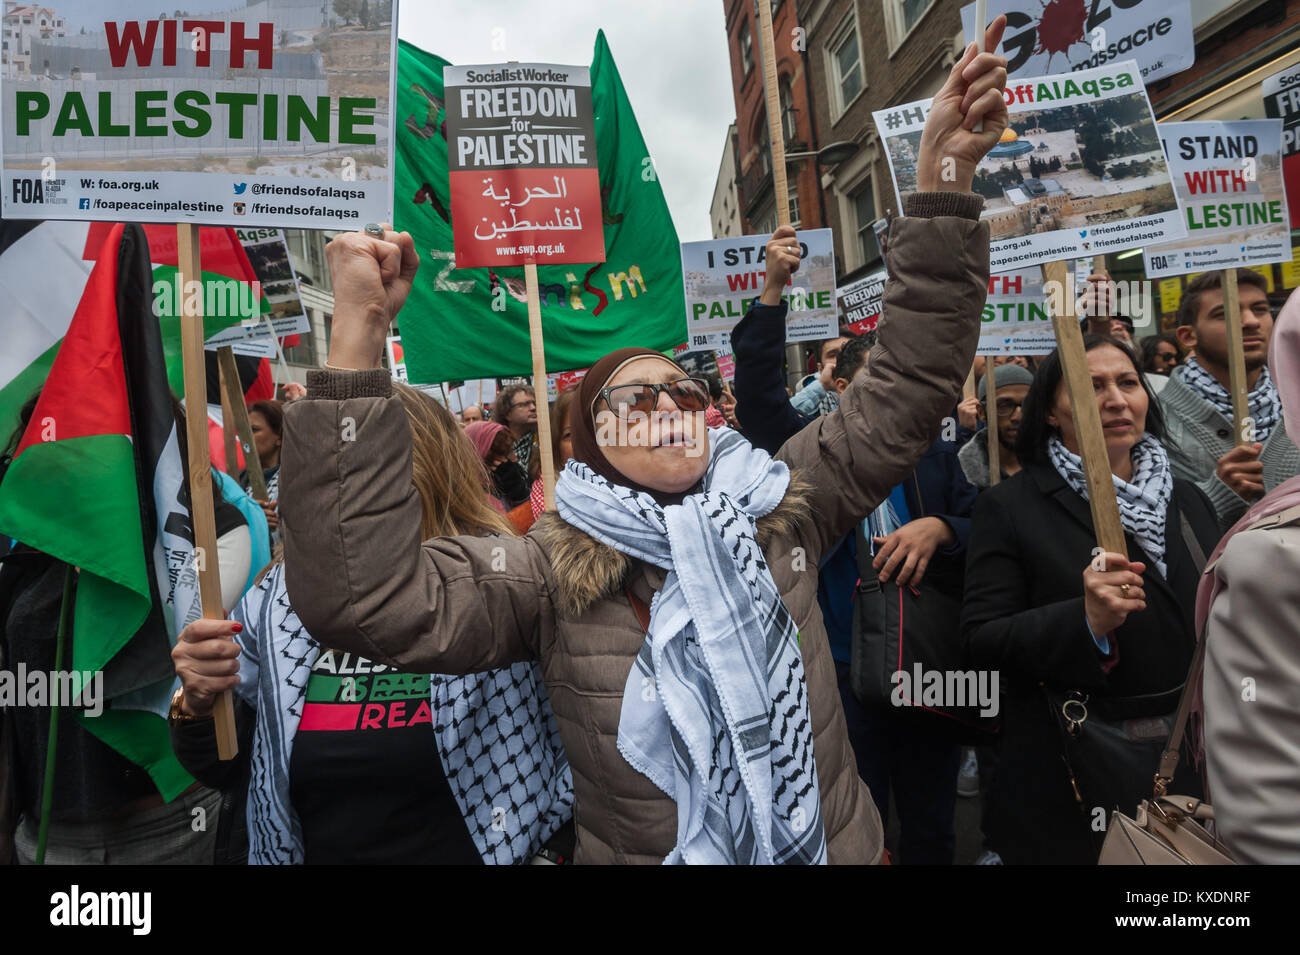 A woman waves her fist at the protest at Israeli embassy in London calleing for an end to Israeli occupation and repression and Freedom for Palestine. Stock Photo